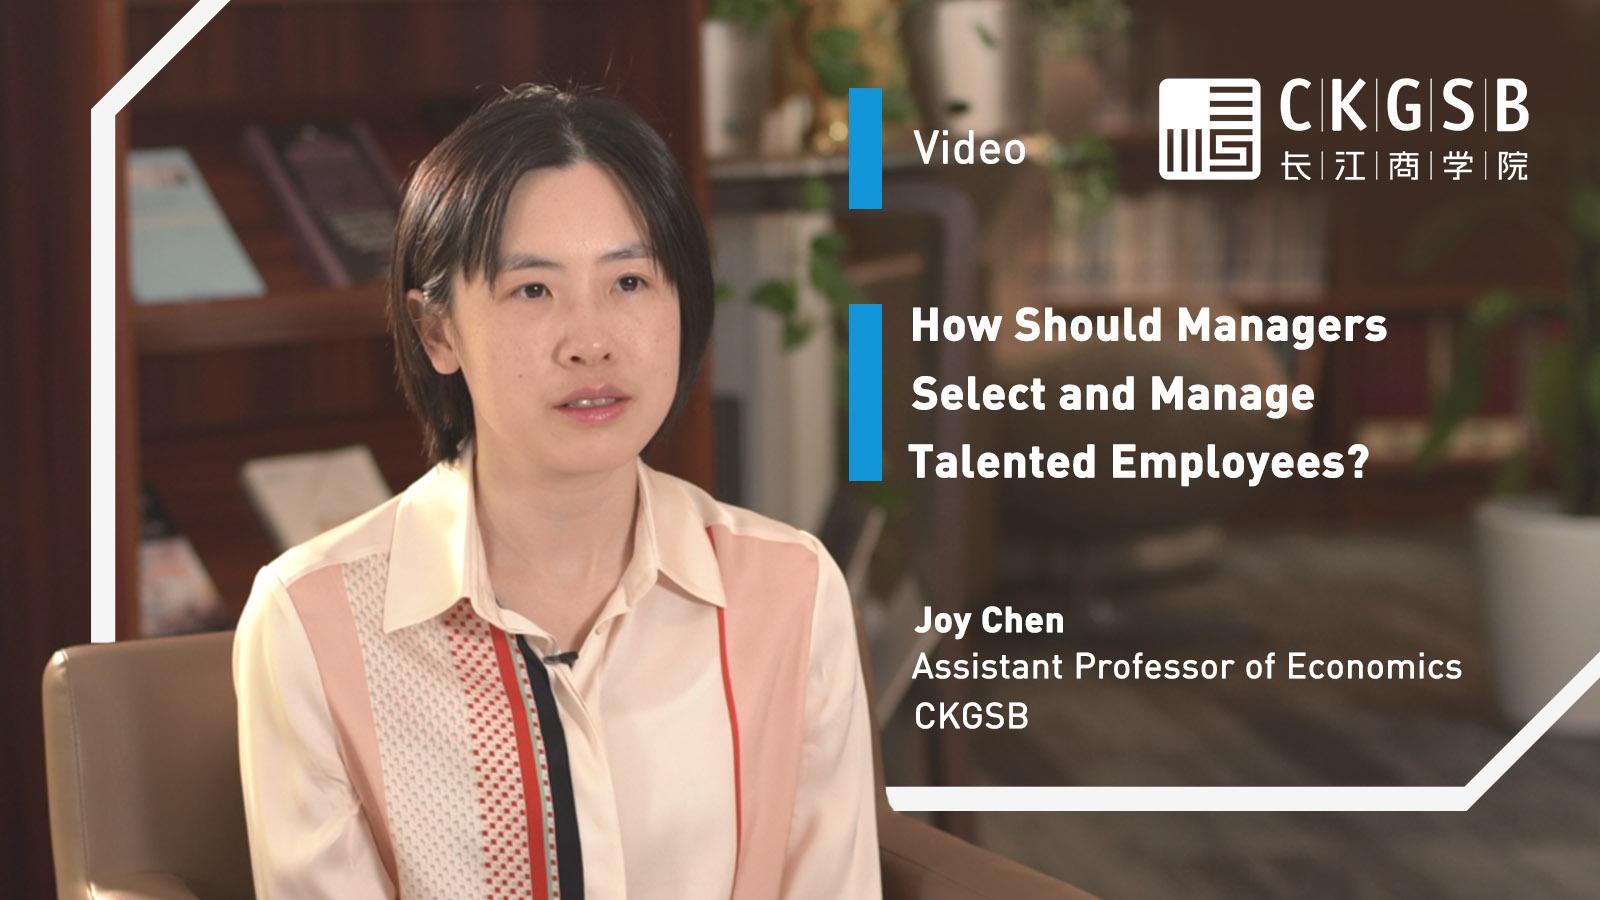 How-Should-Managers-Select-and-Manage-Talented-Employees-3ie7cs4rgiyqq9hcg5jzls.jpg